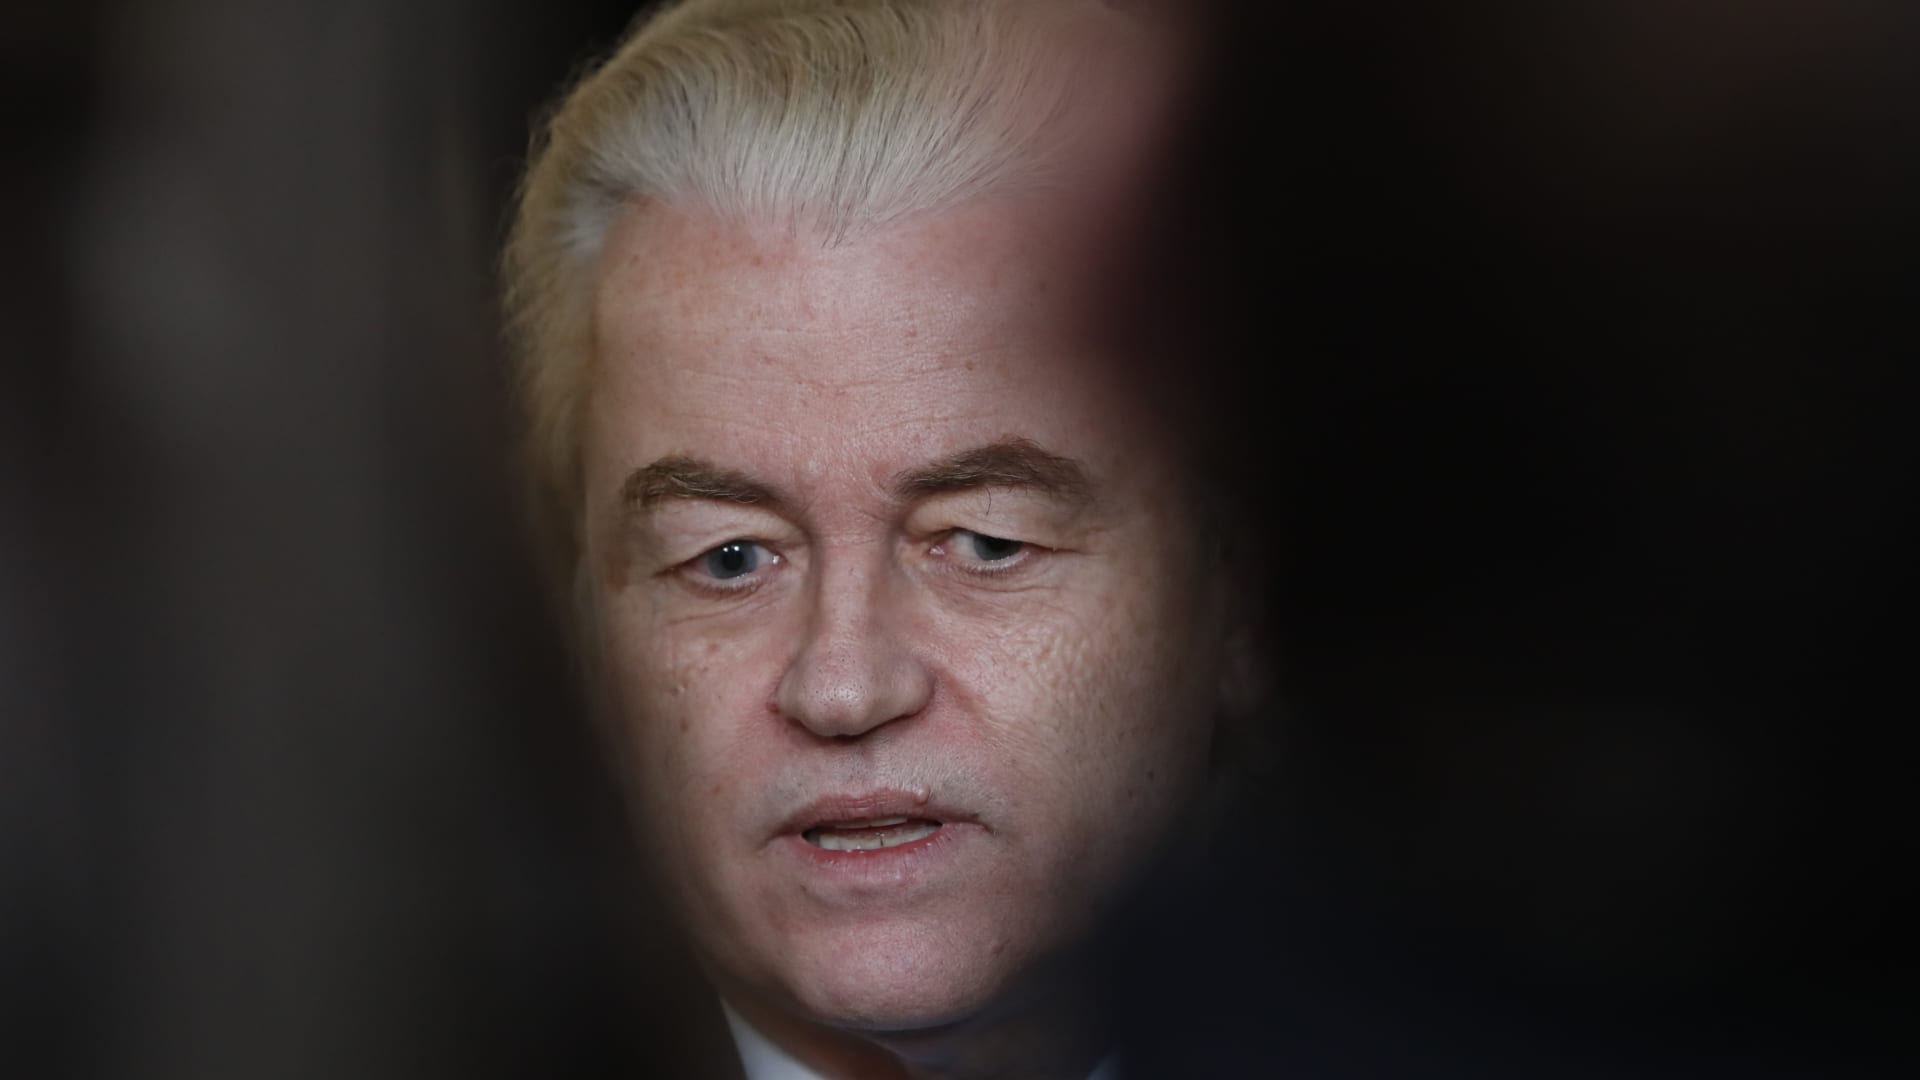 Dutch far-right Geert Wilders' hopes of becoming prime minister sink after coalition talks collapse 